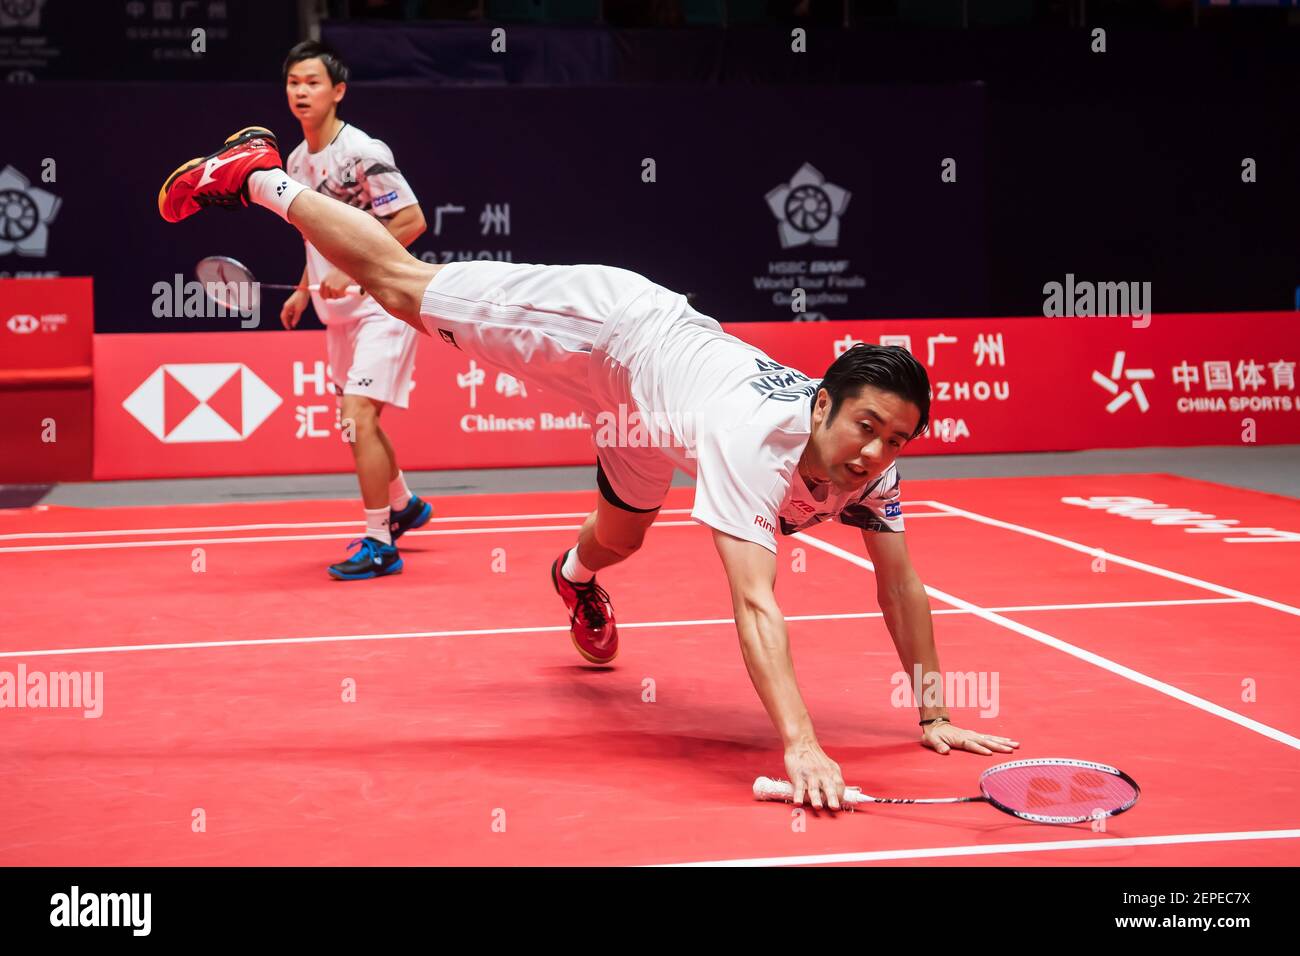 Japanese professional badminton players Hiroyuki Endo and Yuta Watanabe  compete against Japanese professional badminton players Keigo Sonoda and  Takeshi Kamura at the group stage of men's doubles at HSBC BWF World Tour